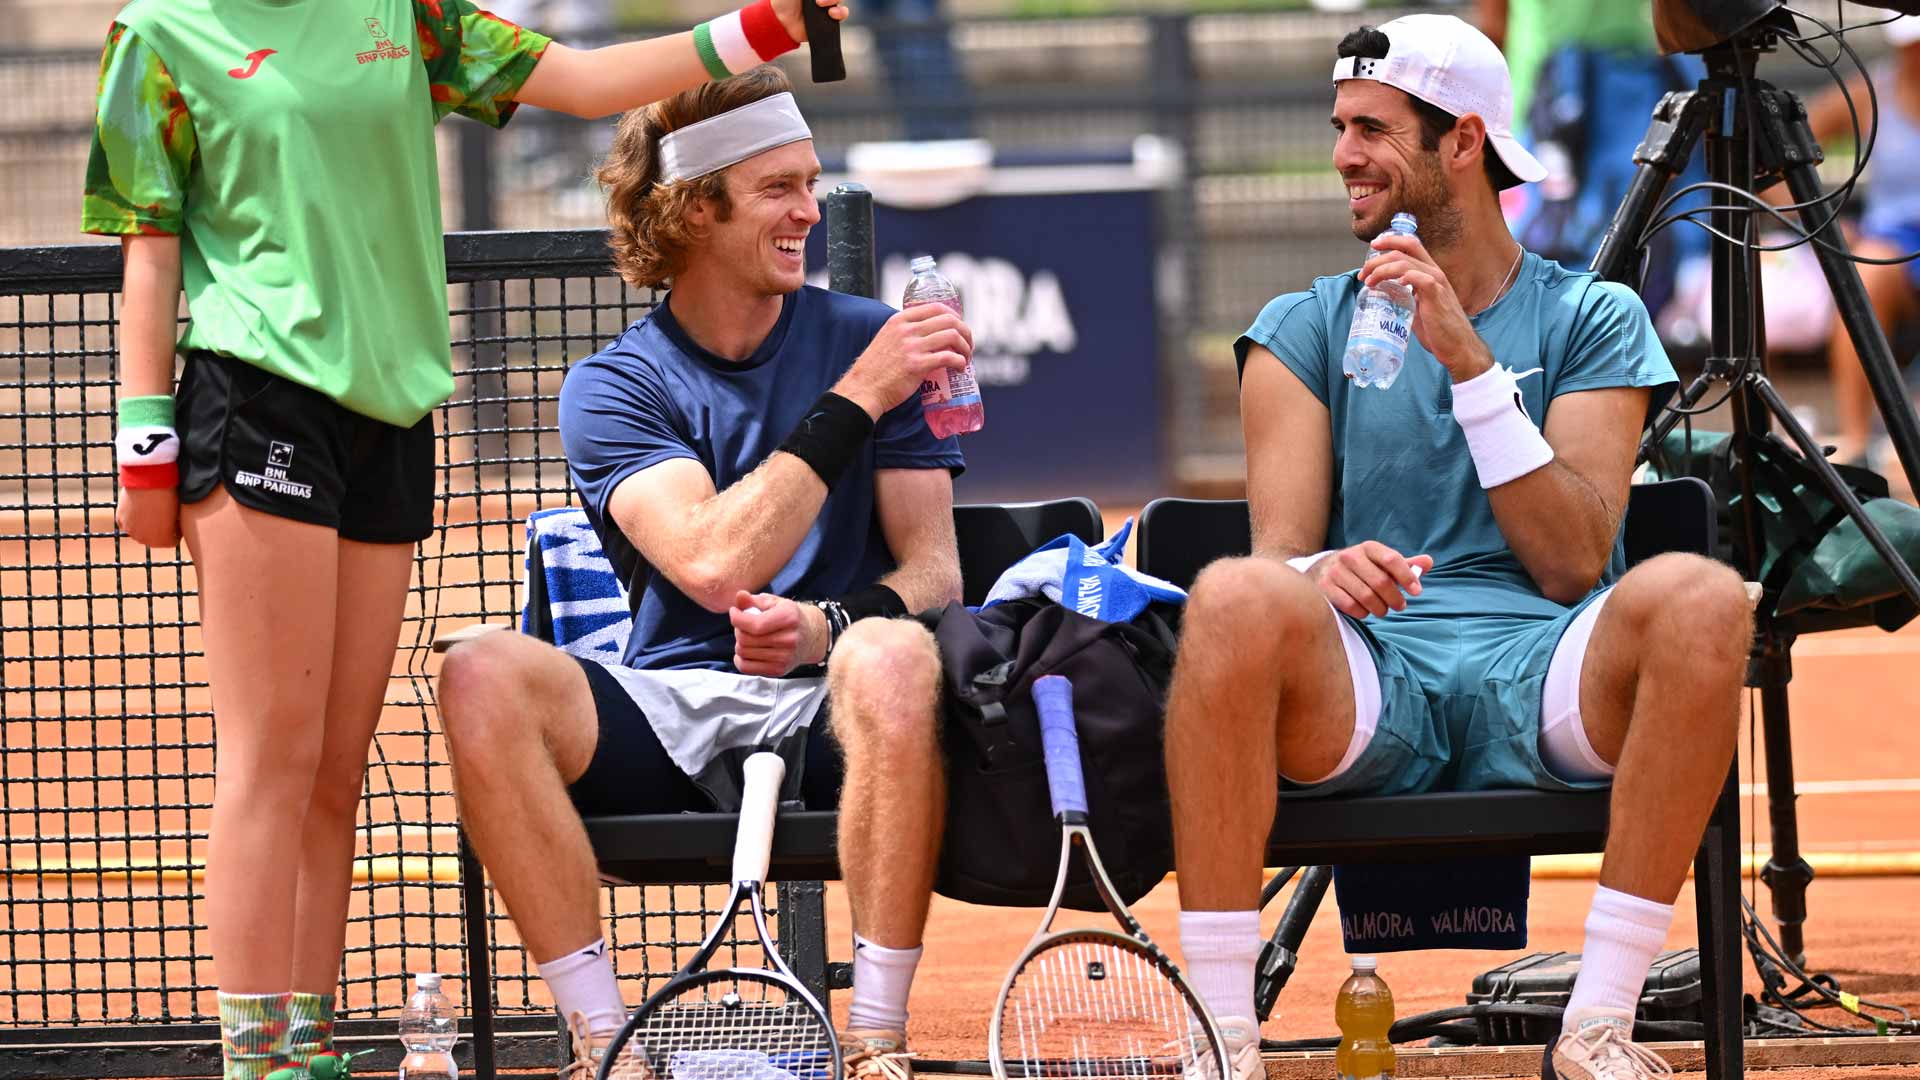 Andrey Rublev and Karen Khachanov share a laugh at the ATP Masters 1000 event in Rome.